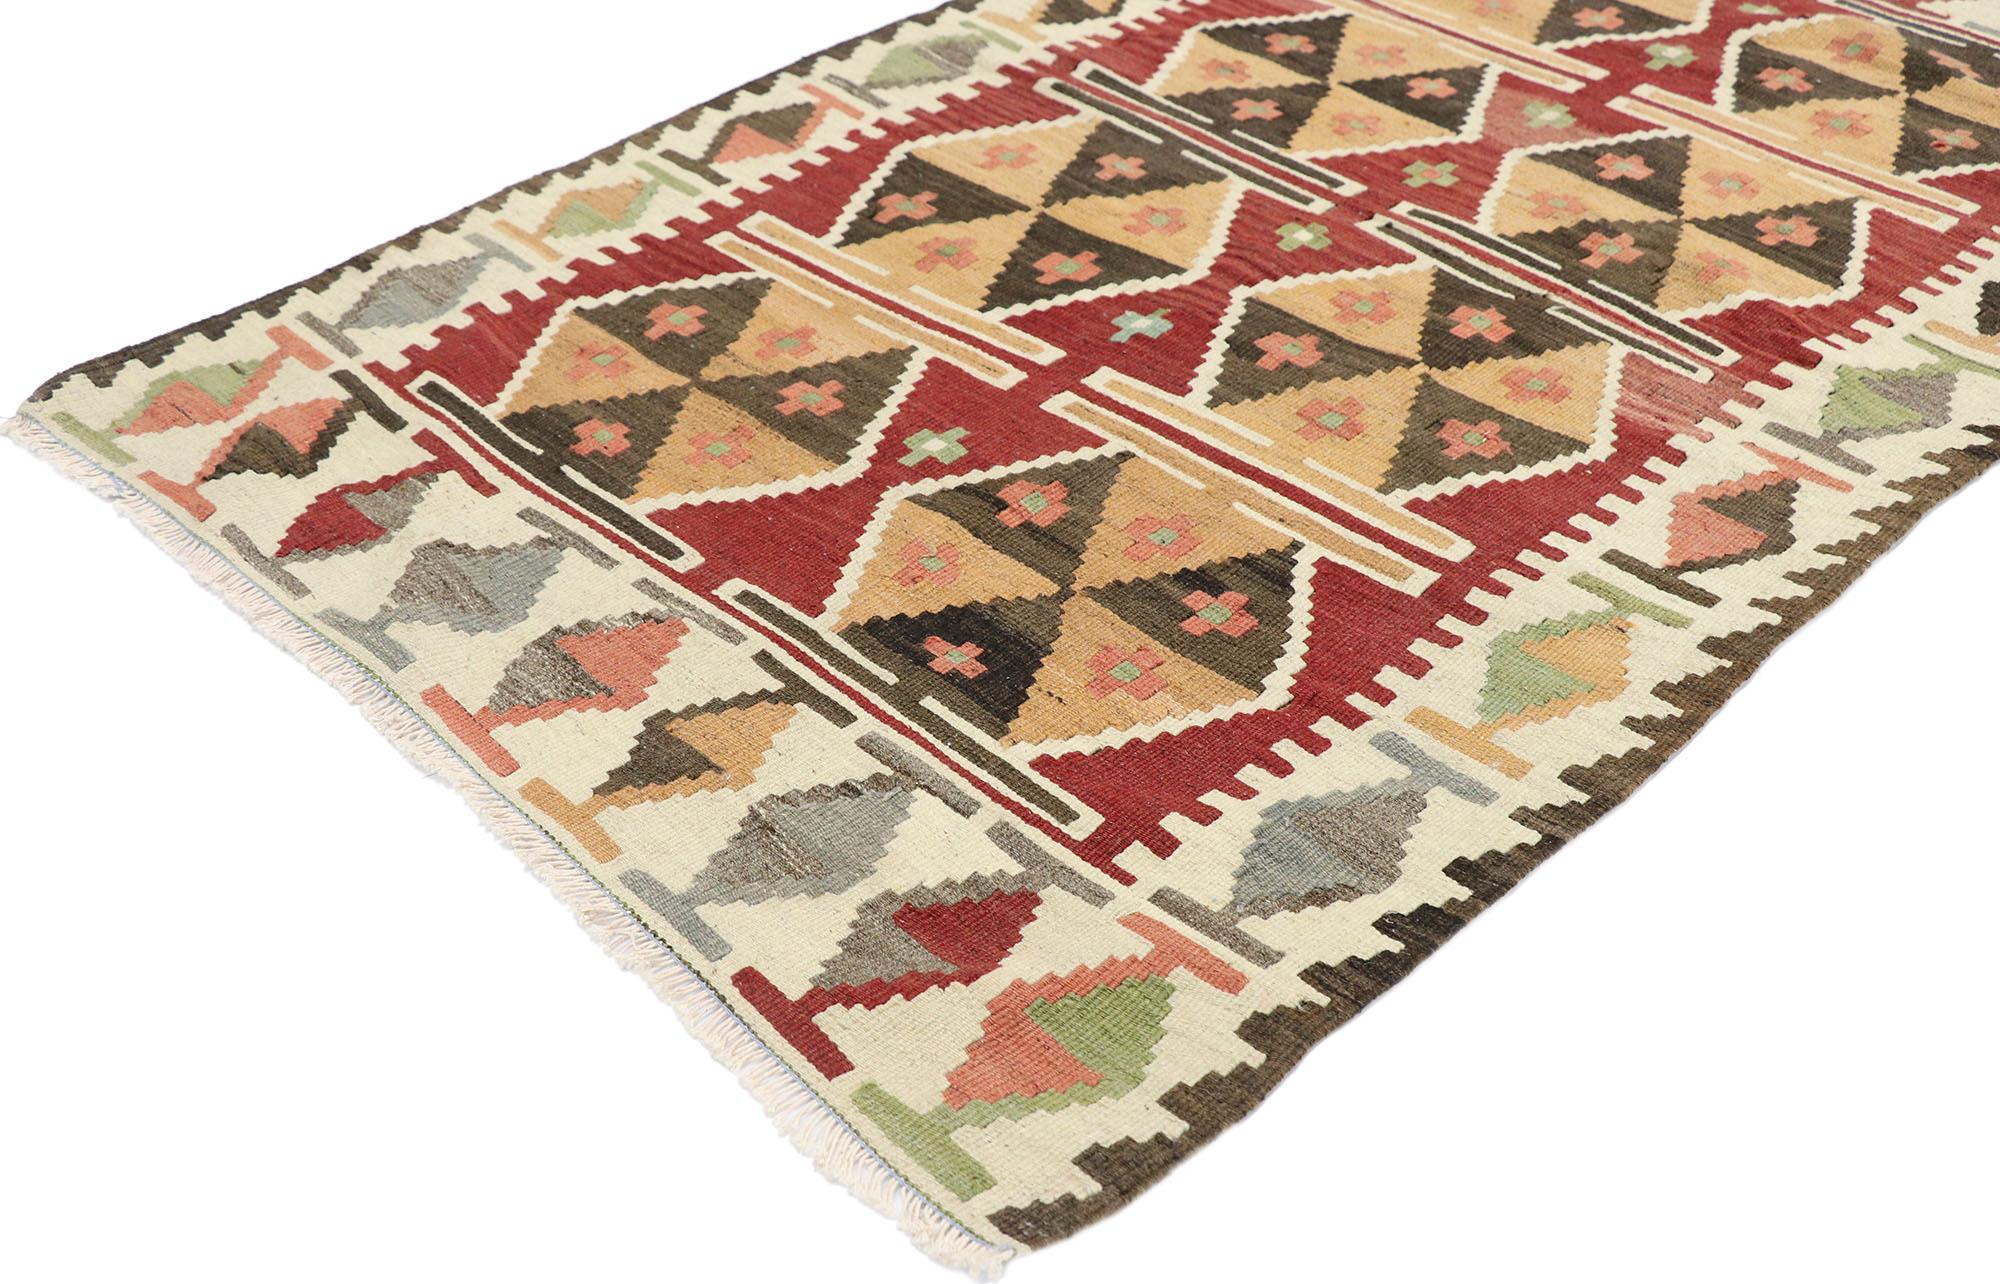 77835 Vintage Persian Shiraz Kilim rug with Tribal Style 02'11 x 04'11. Full of tiny details and a bold expressive design combined with vibrant colors and tribal style, this hand-woven wool vintage Persian Shiraz kilim rug is a captivating vision of